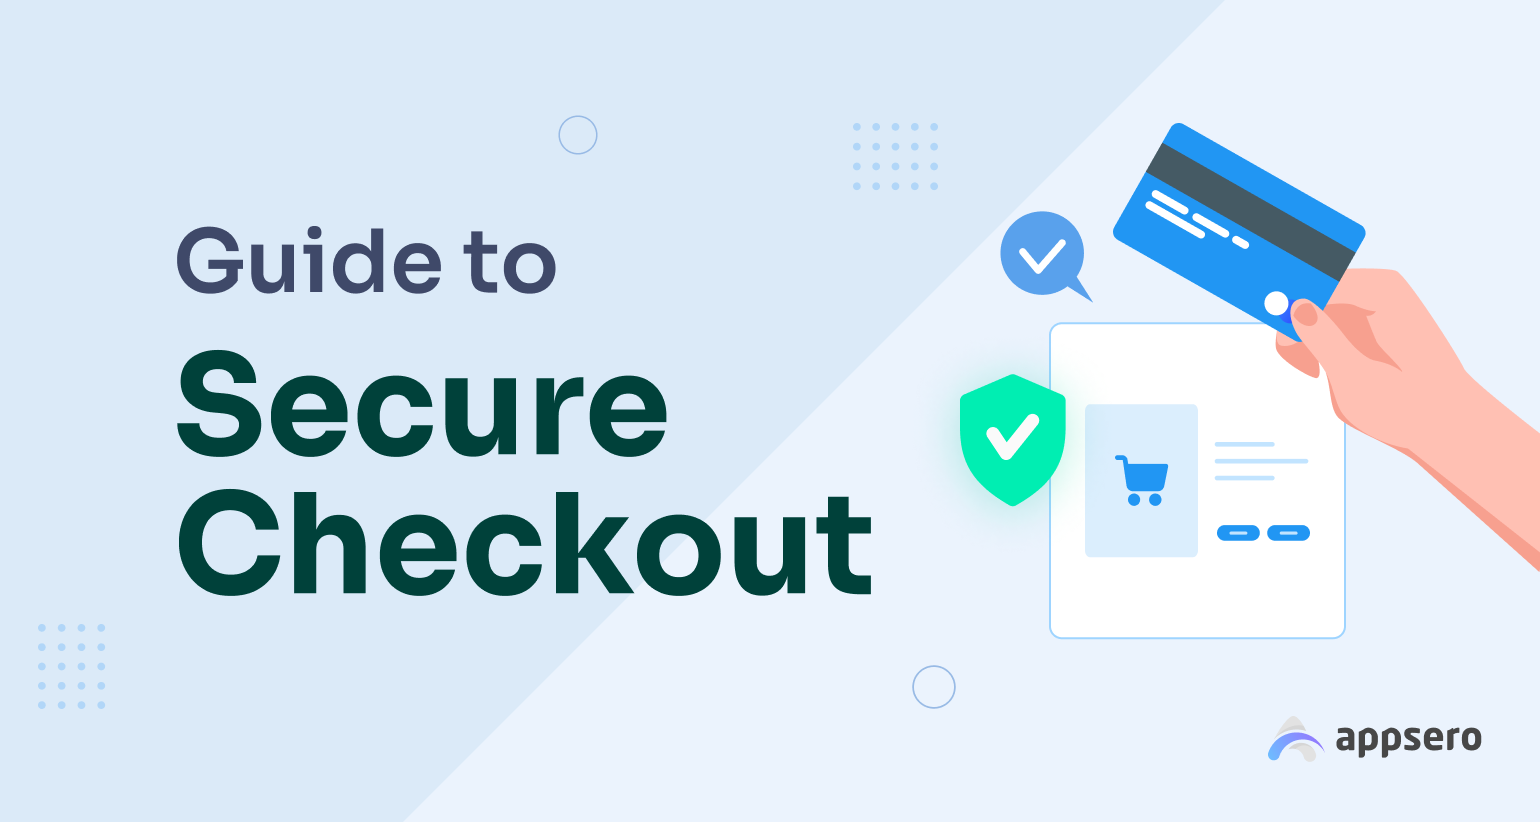 Guide to Secure Checkout